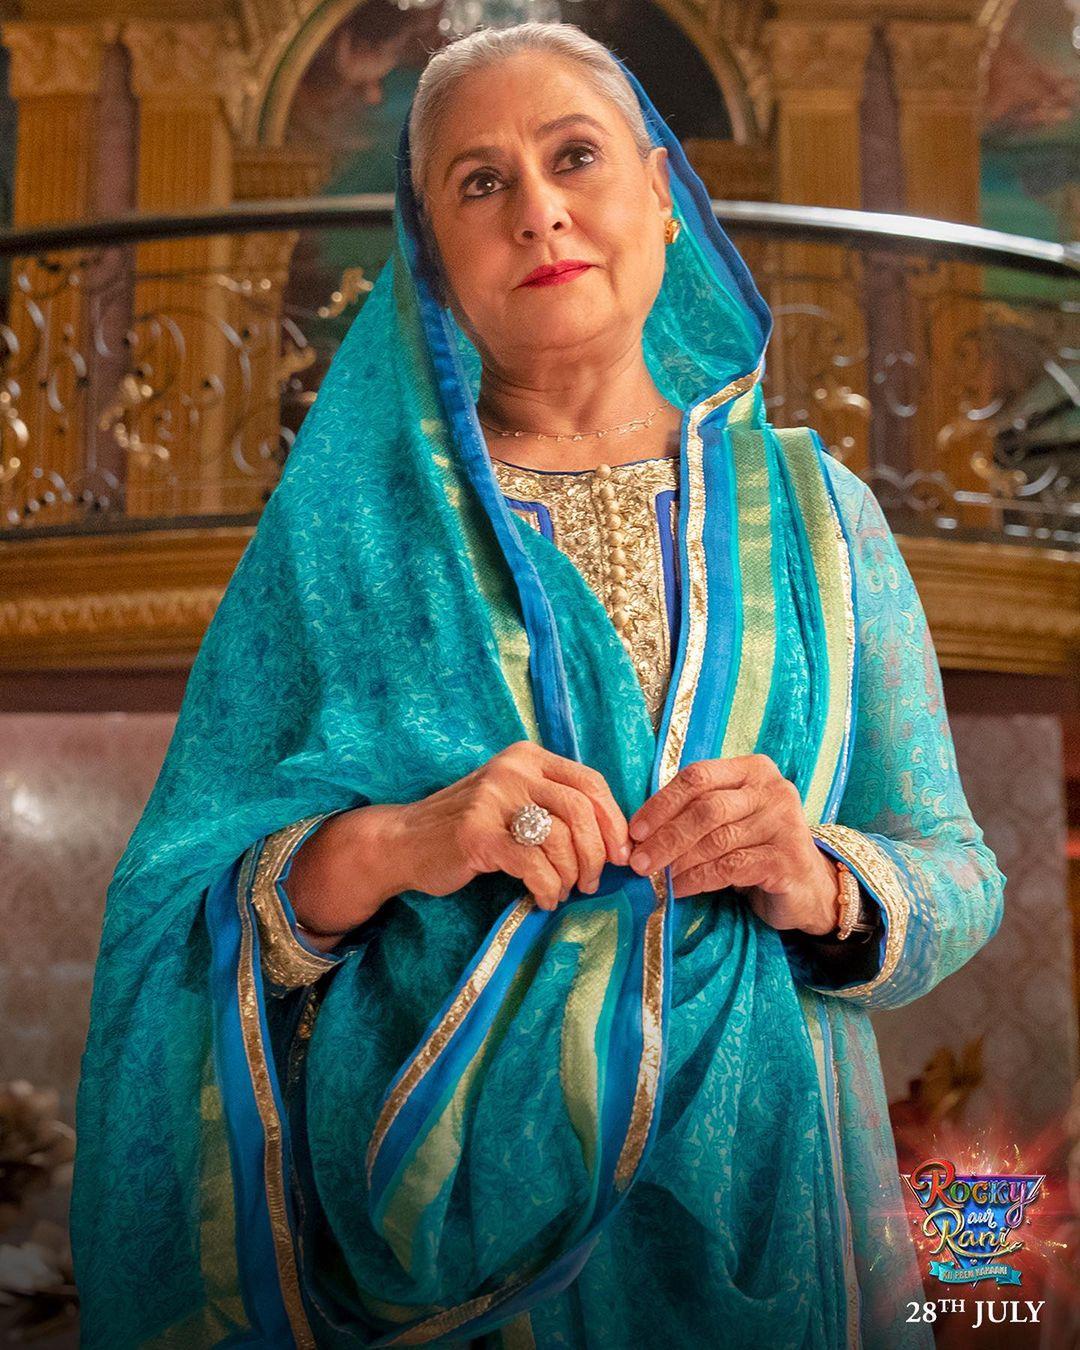 One of the major highlights of the film is the legendary Jaya Bachchan's comeback to the silver screen. Having previously collaborated with Karan Johar on the blockbuster film Kabhi Khushi Kabhie Gham, Jaya Bachchan's return to the silver screen in a Karan Johar directorial has heightened expectations. 